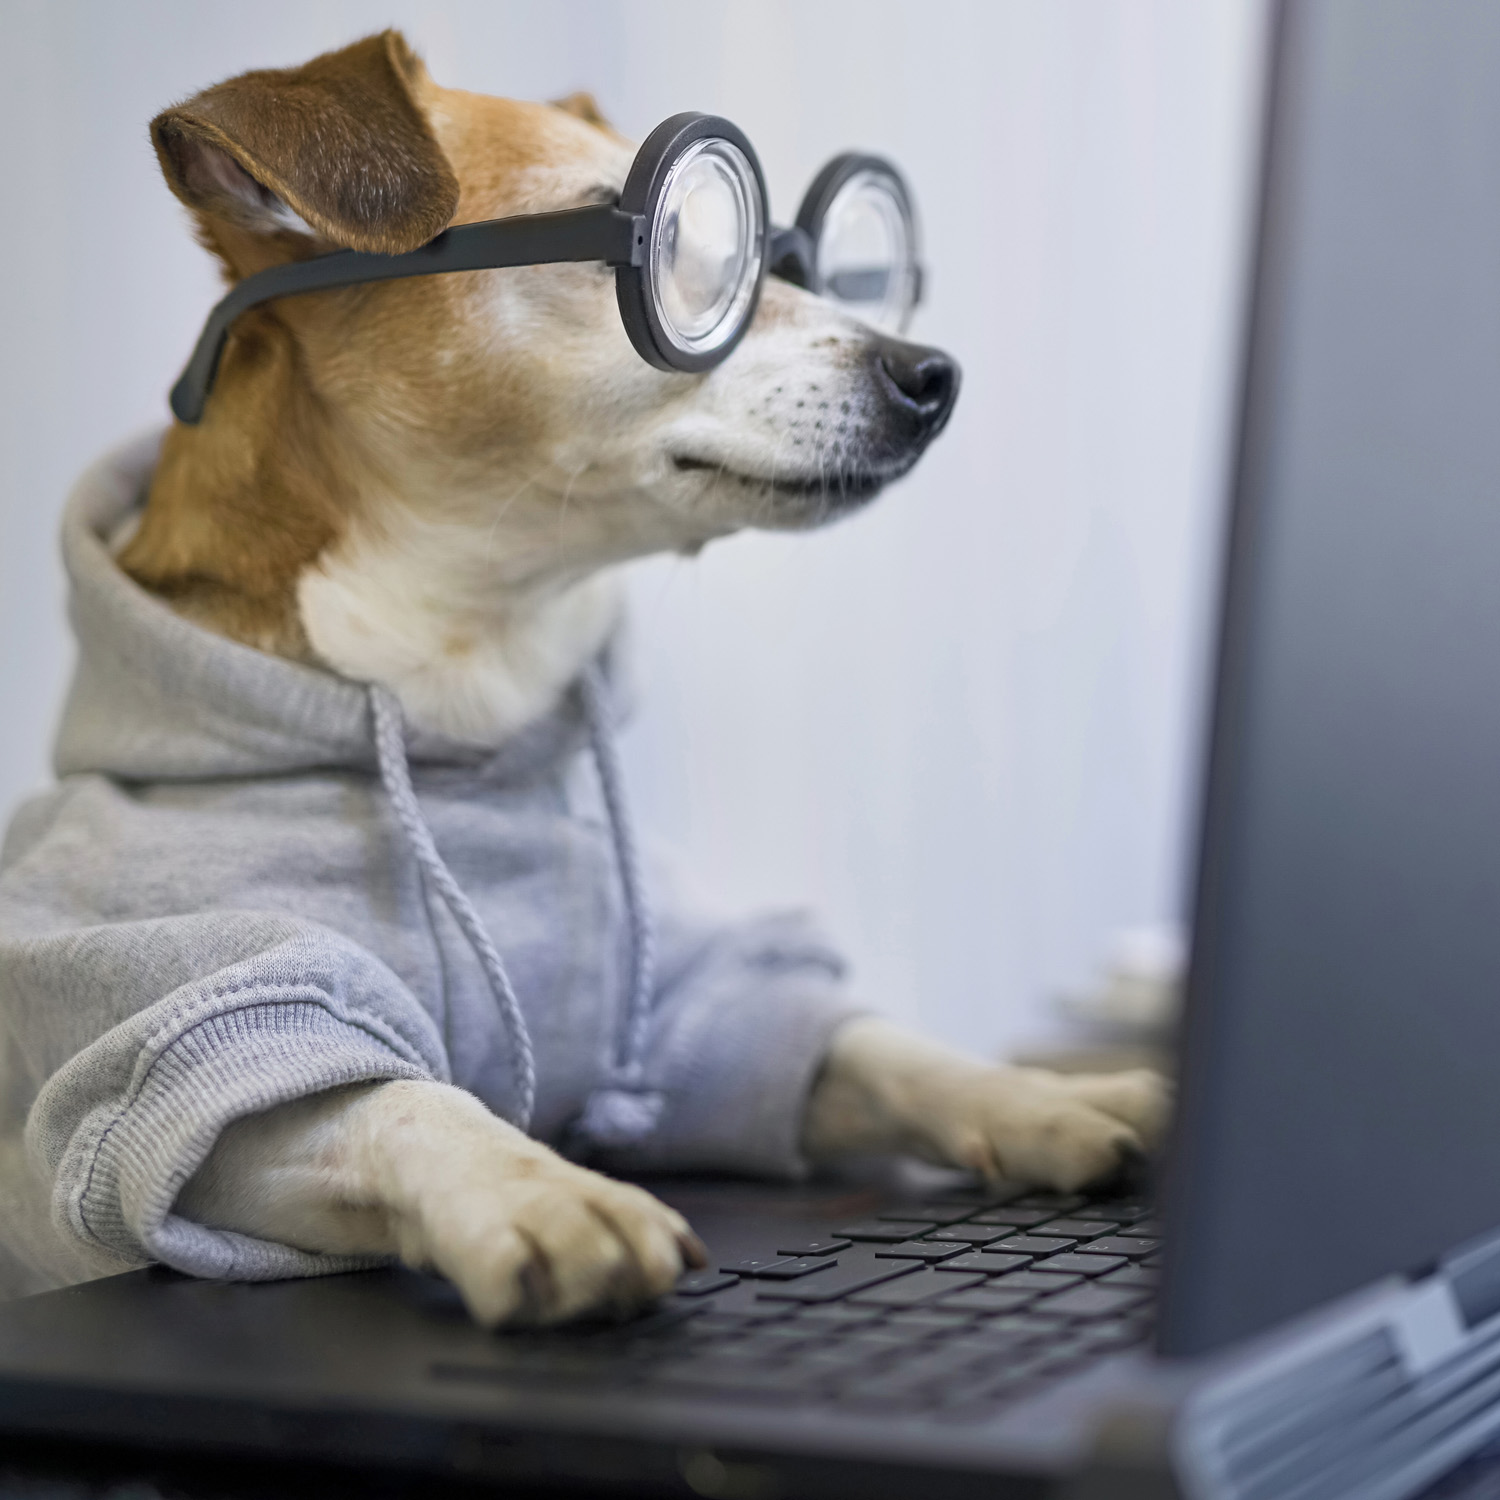 A cute dog with nerdy glasses using a laptop computer